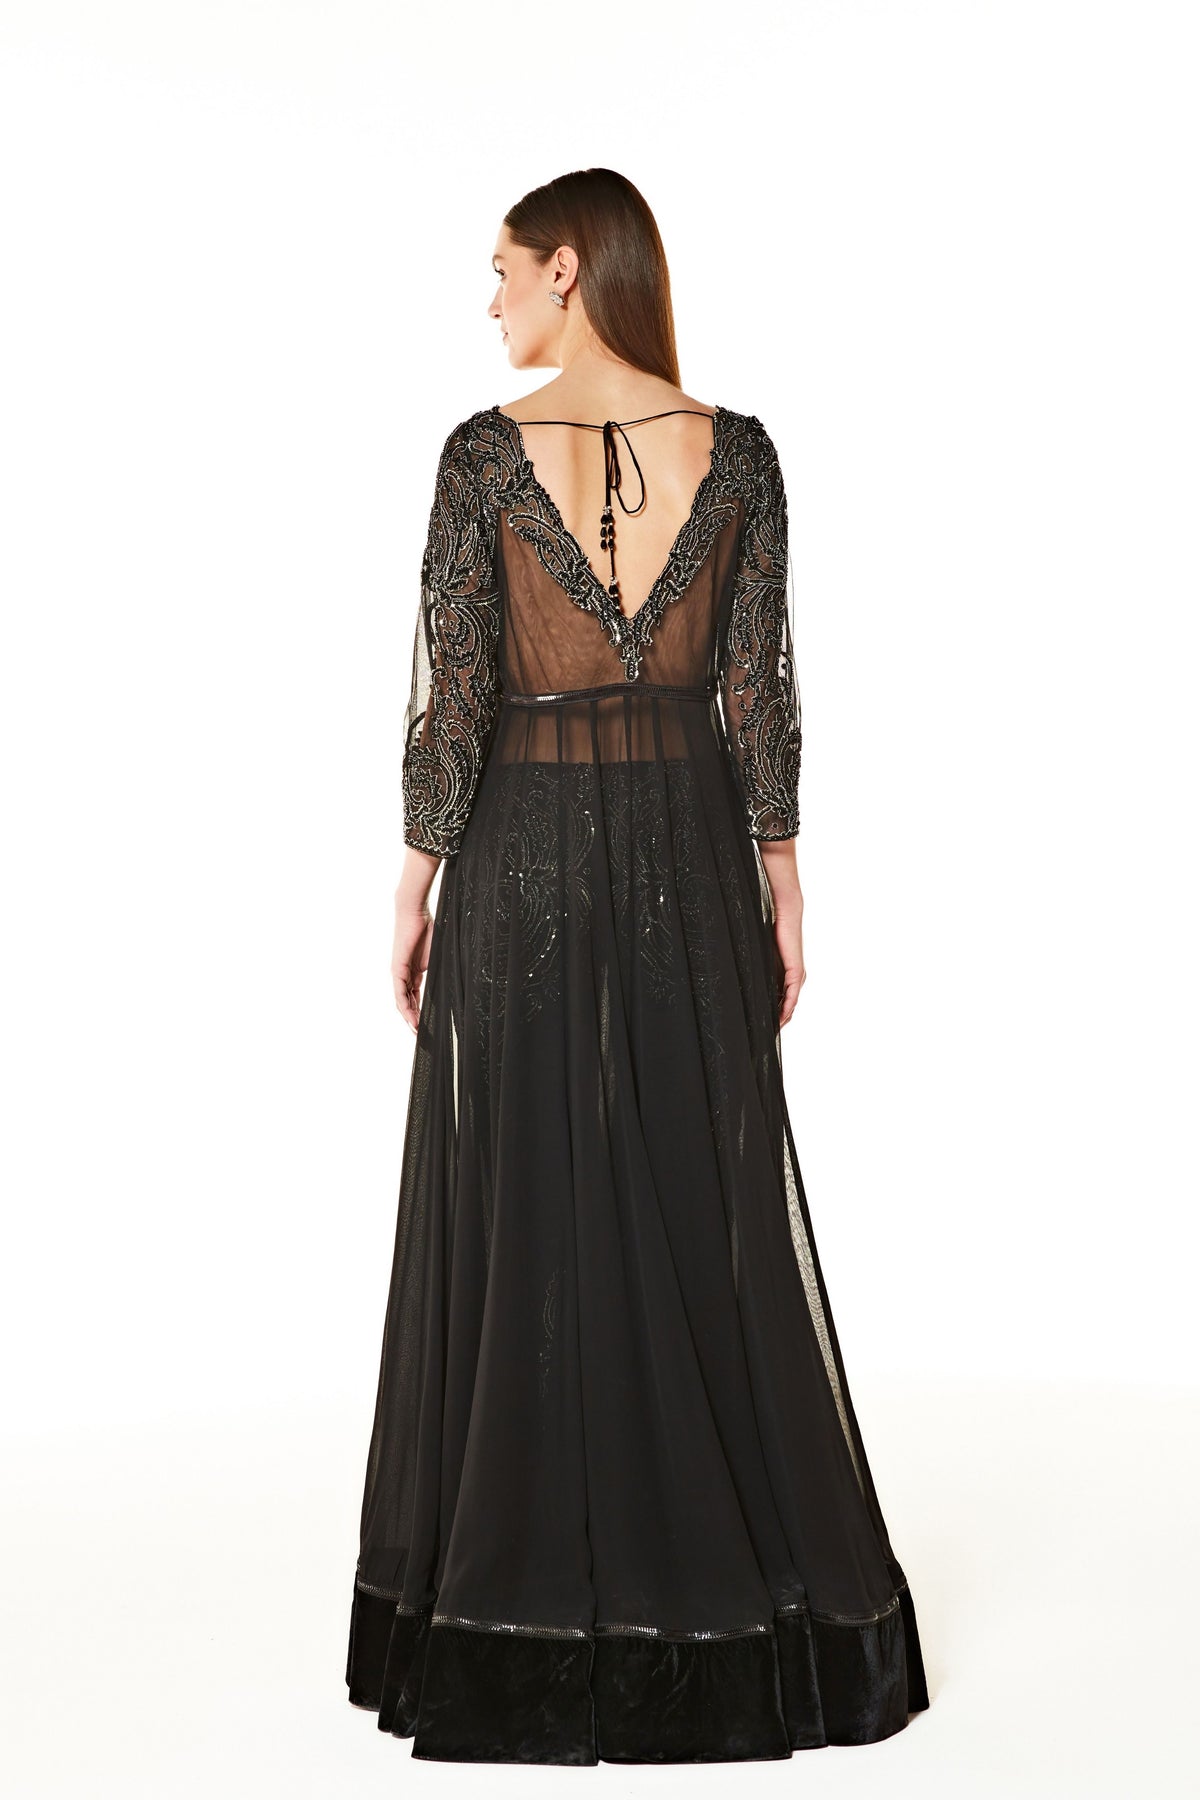 Adah Black Gown With Pant